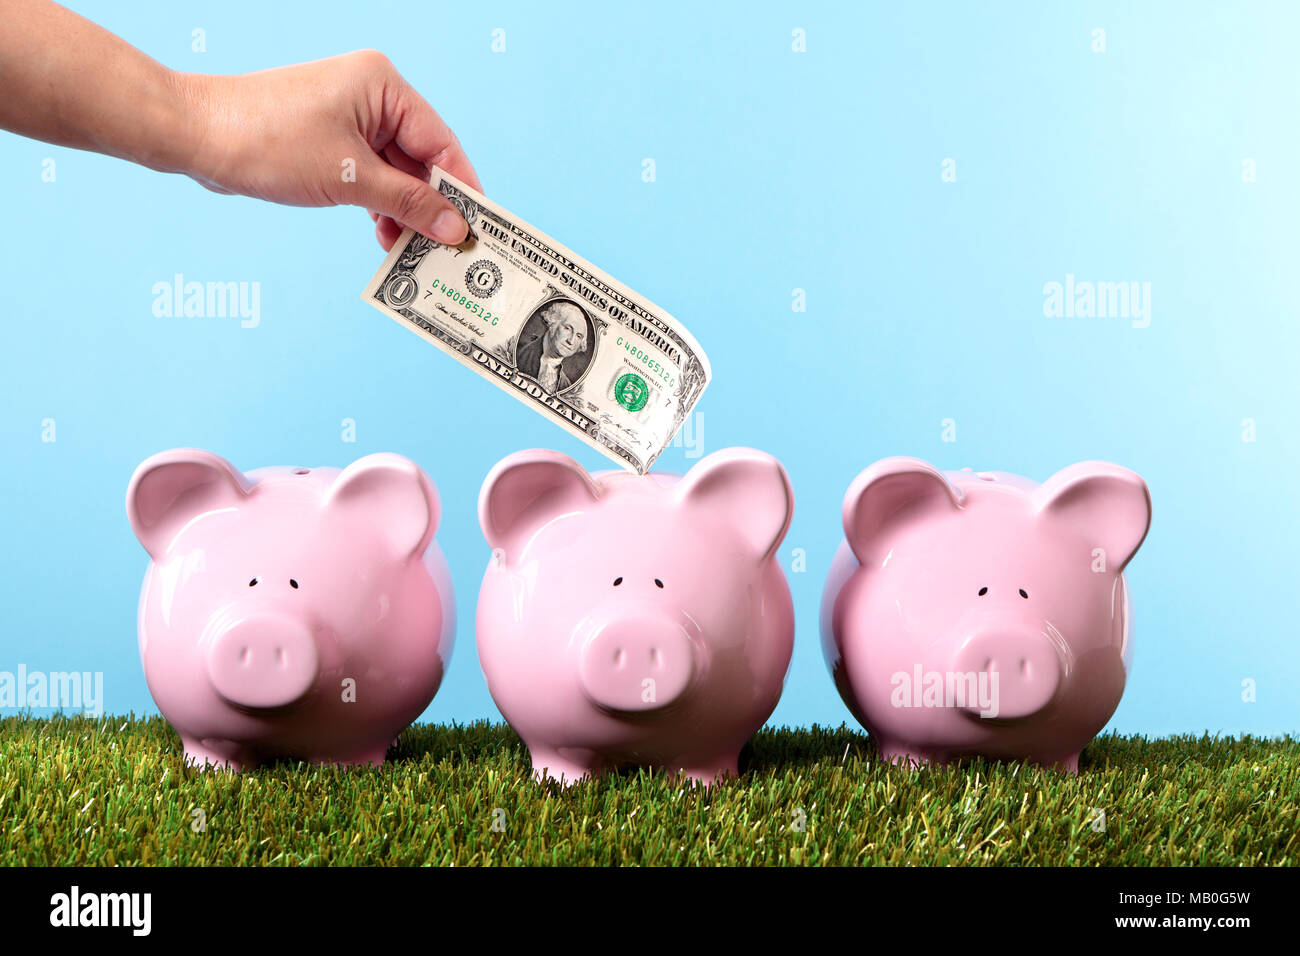 Female hand putting a one dollar bill into a pink piggy bank Stock Photo